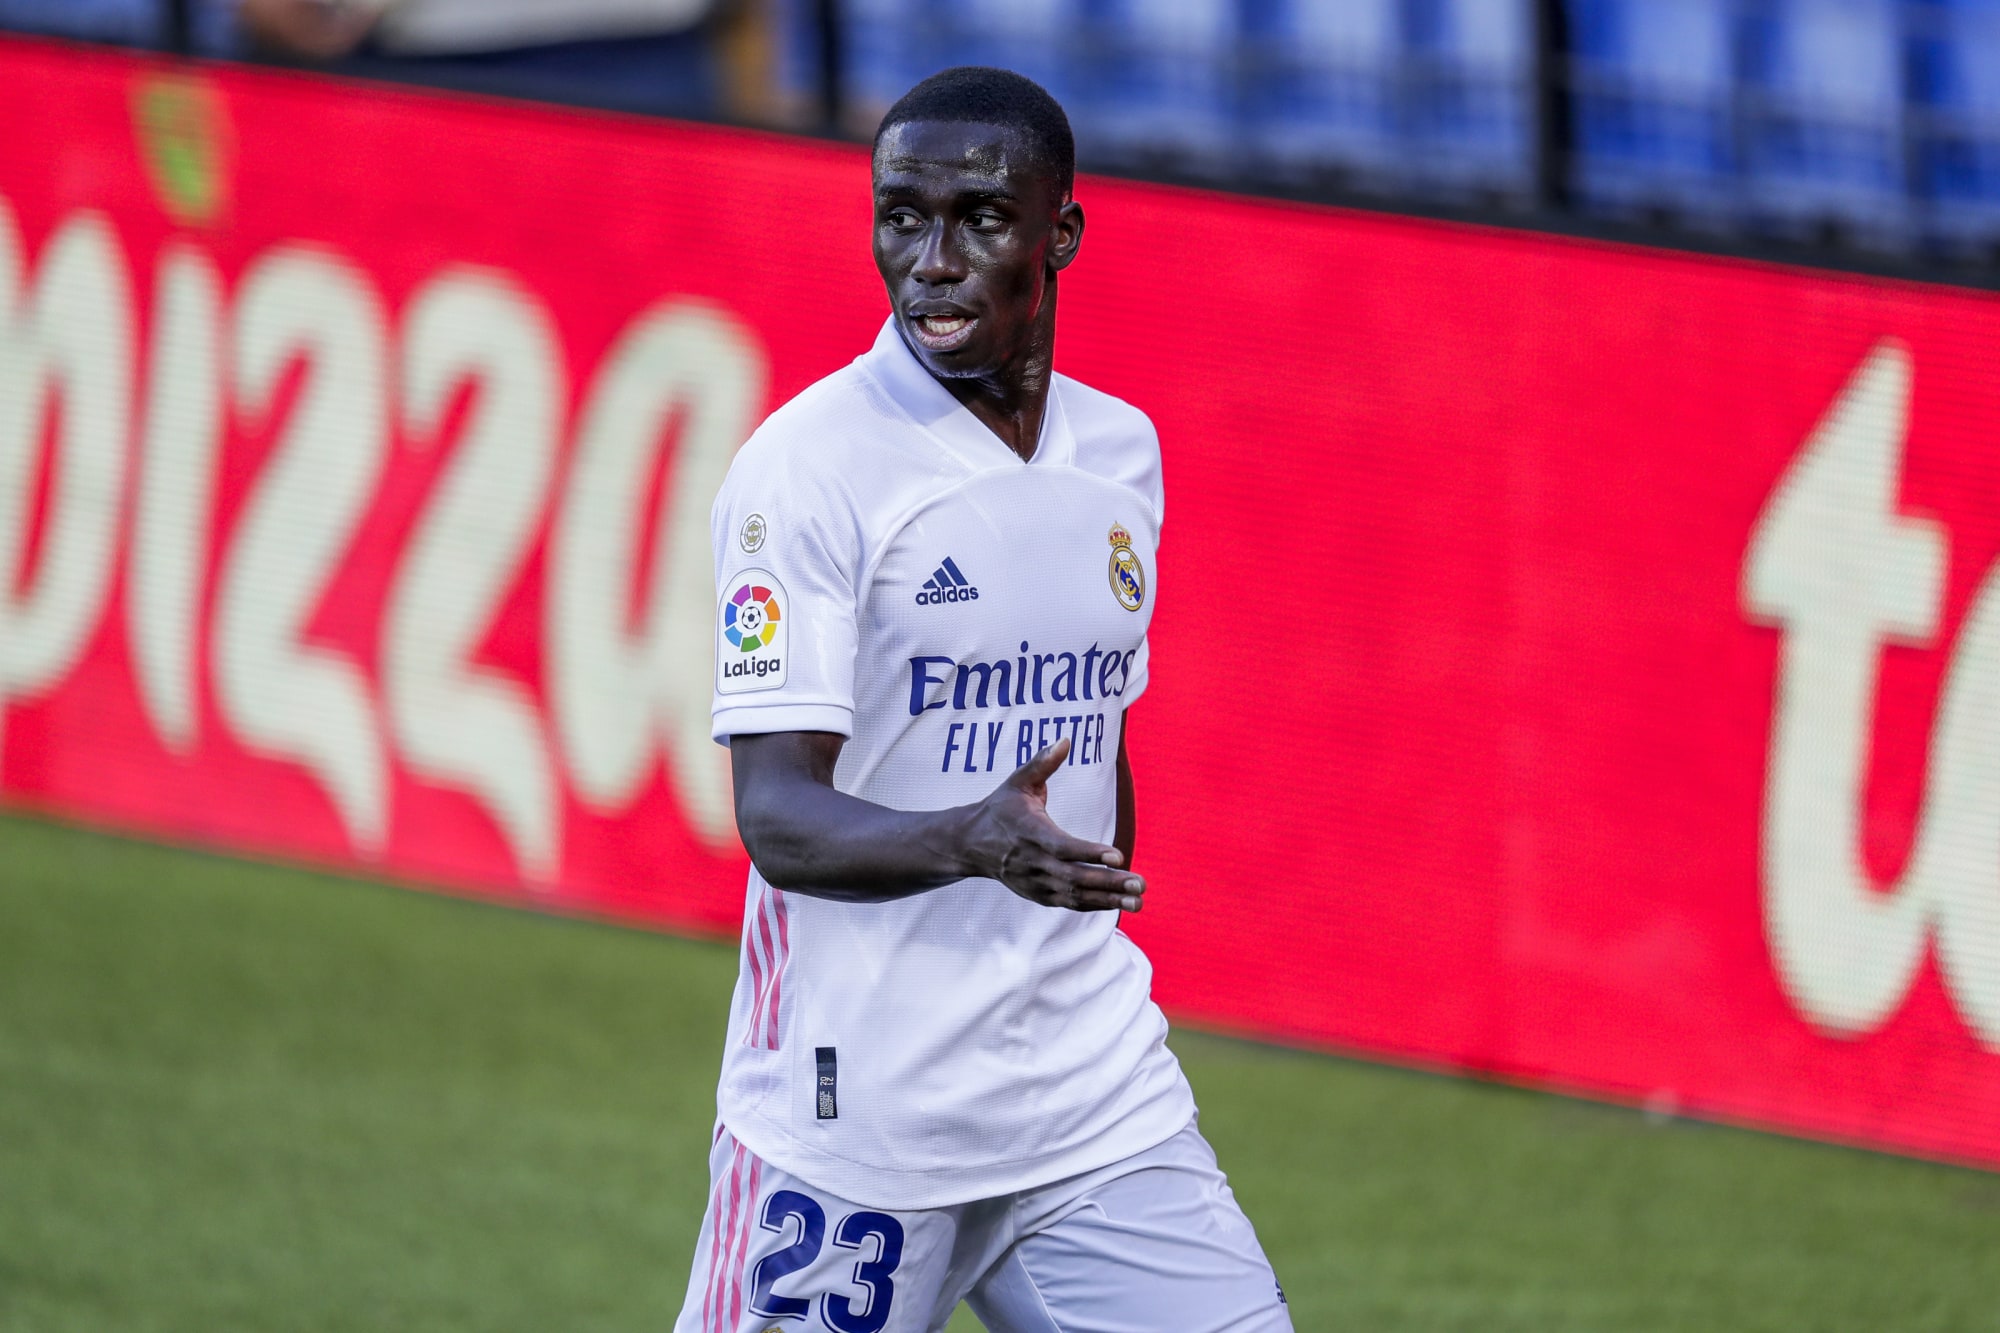 Ferland Mendy Injury: Will Real Madrid LB be available against Chelsea?